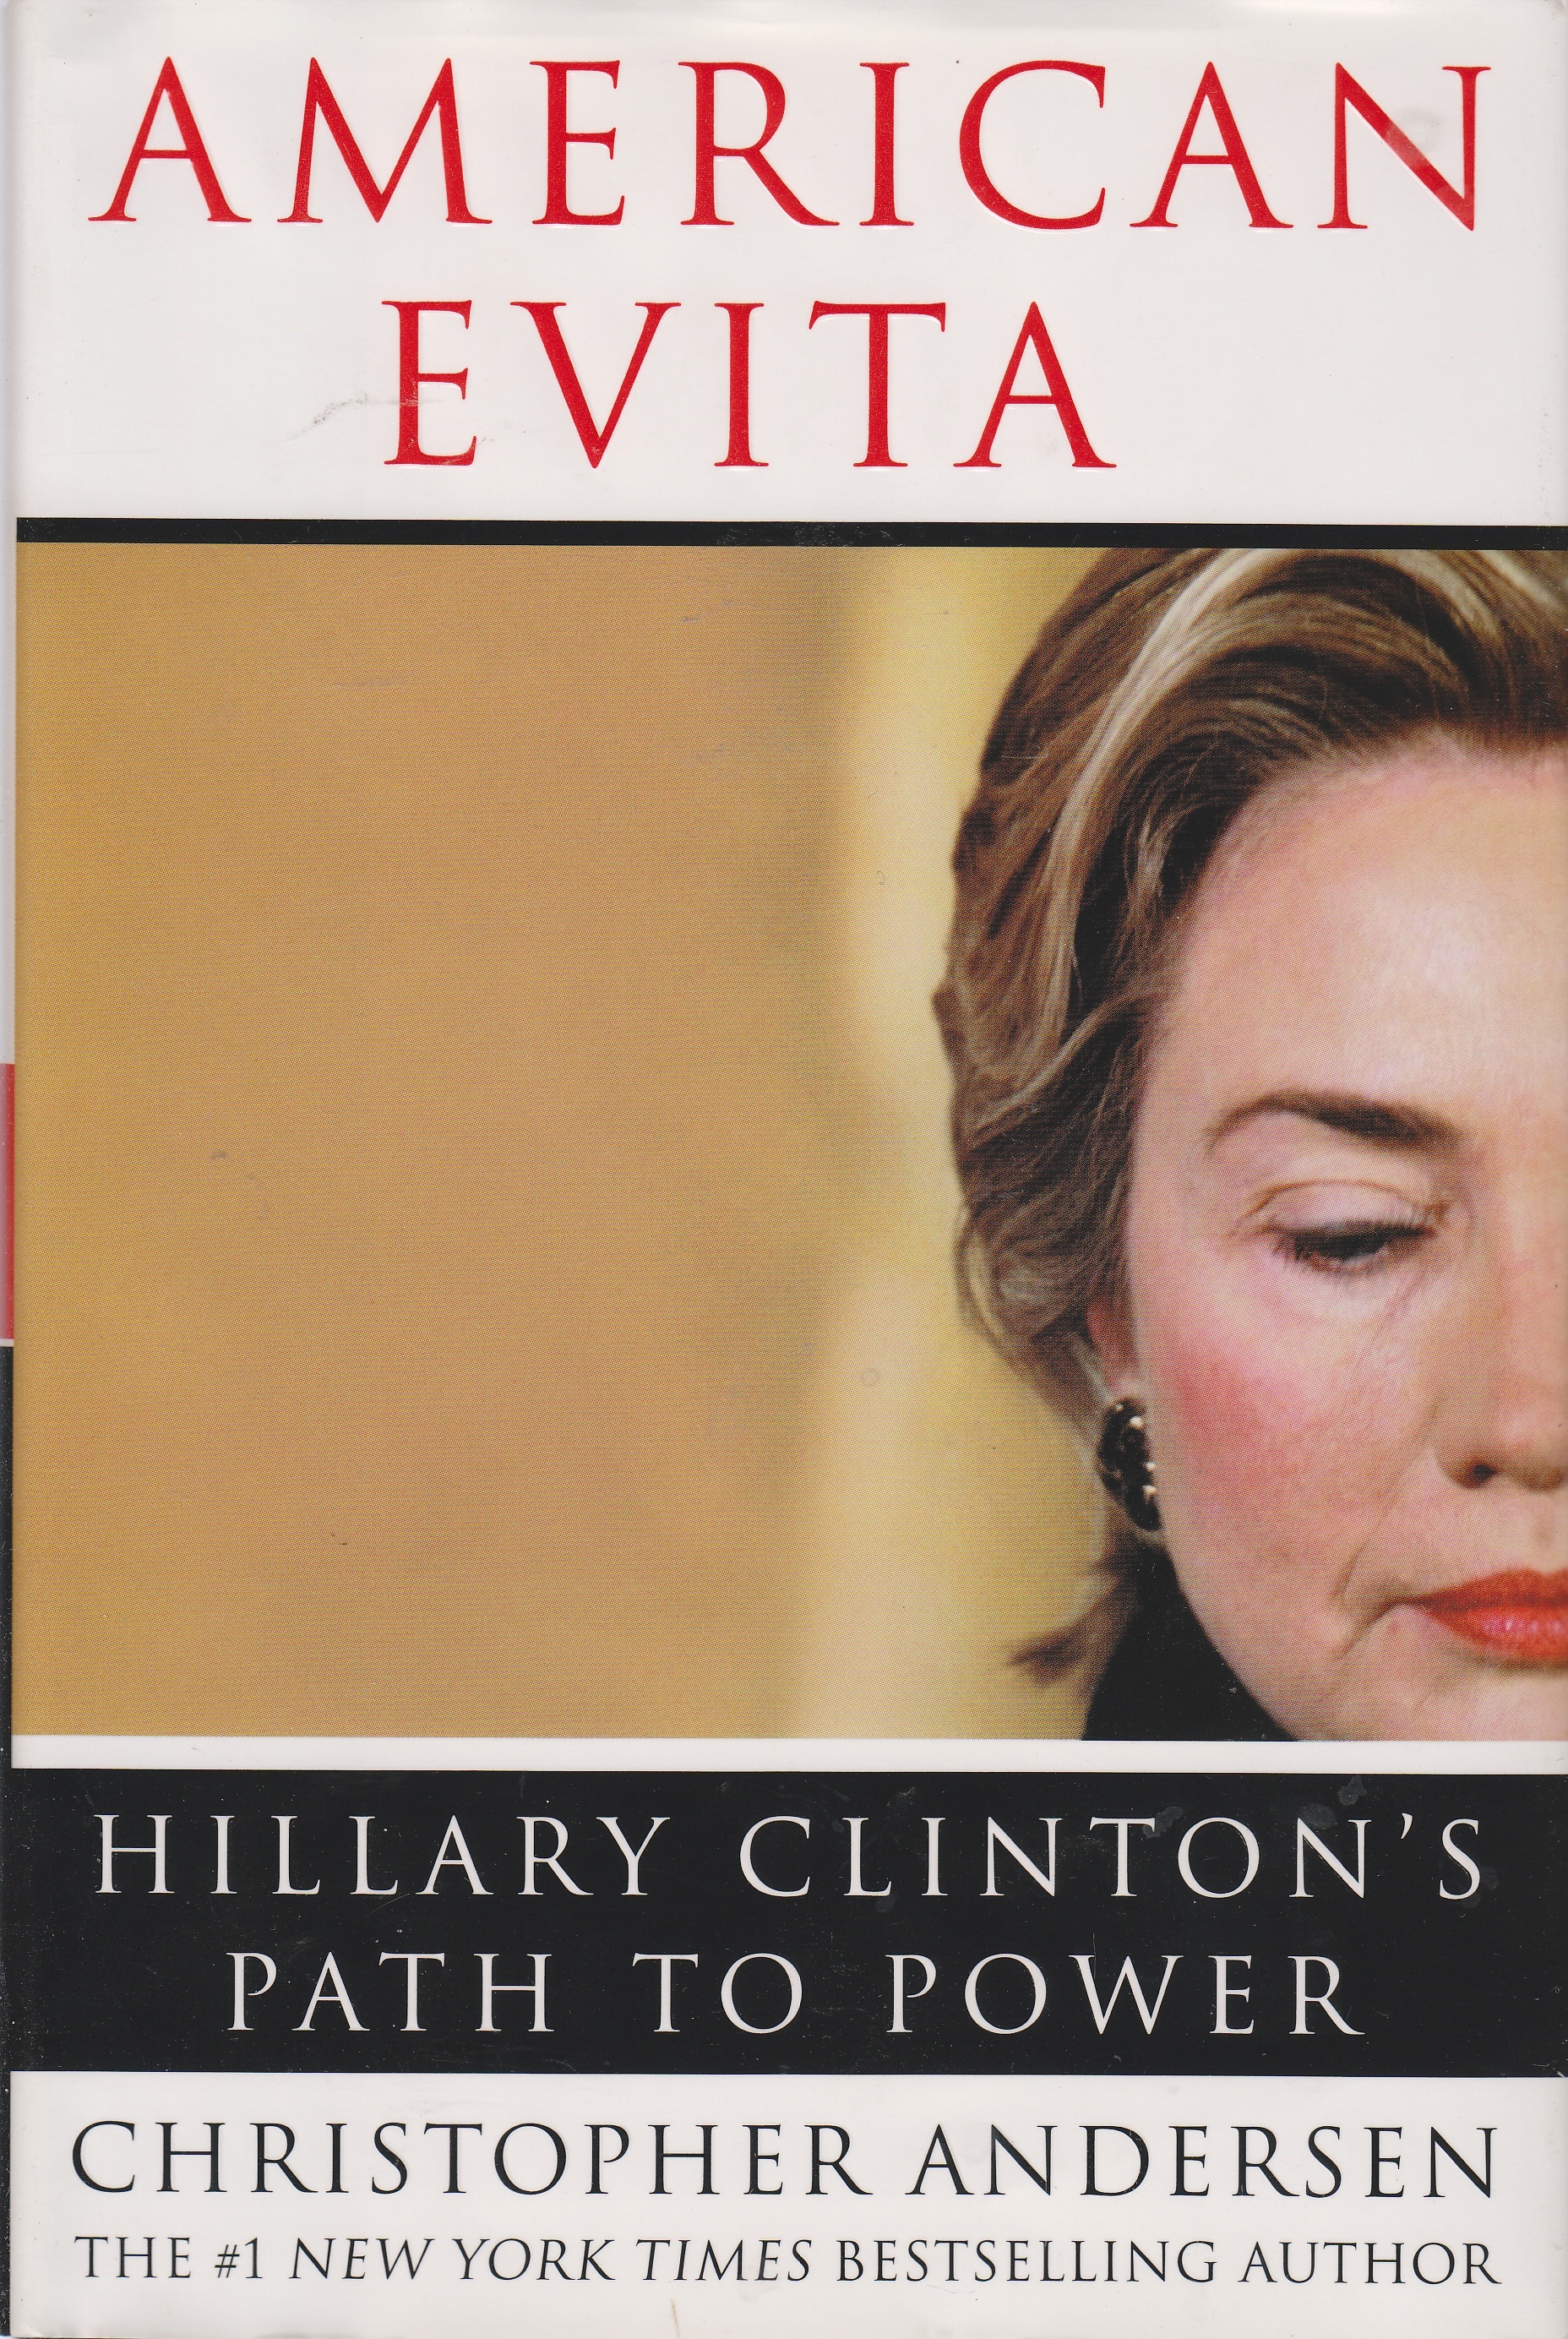 Image for American Evita Hillary Clinton's Path to Power